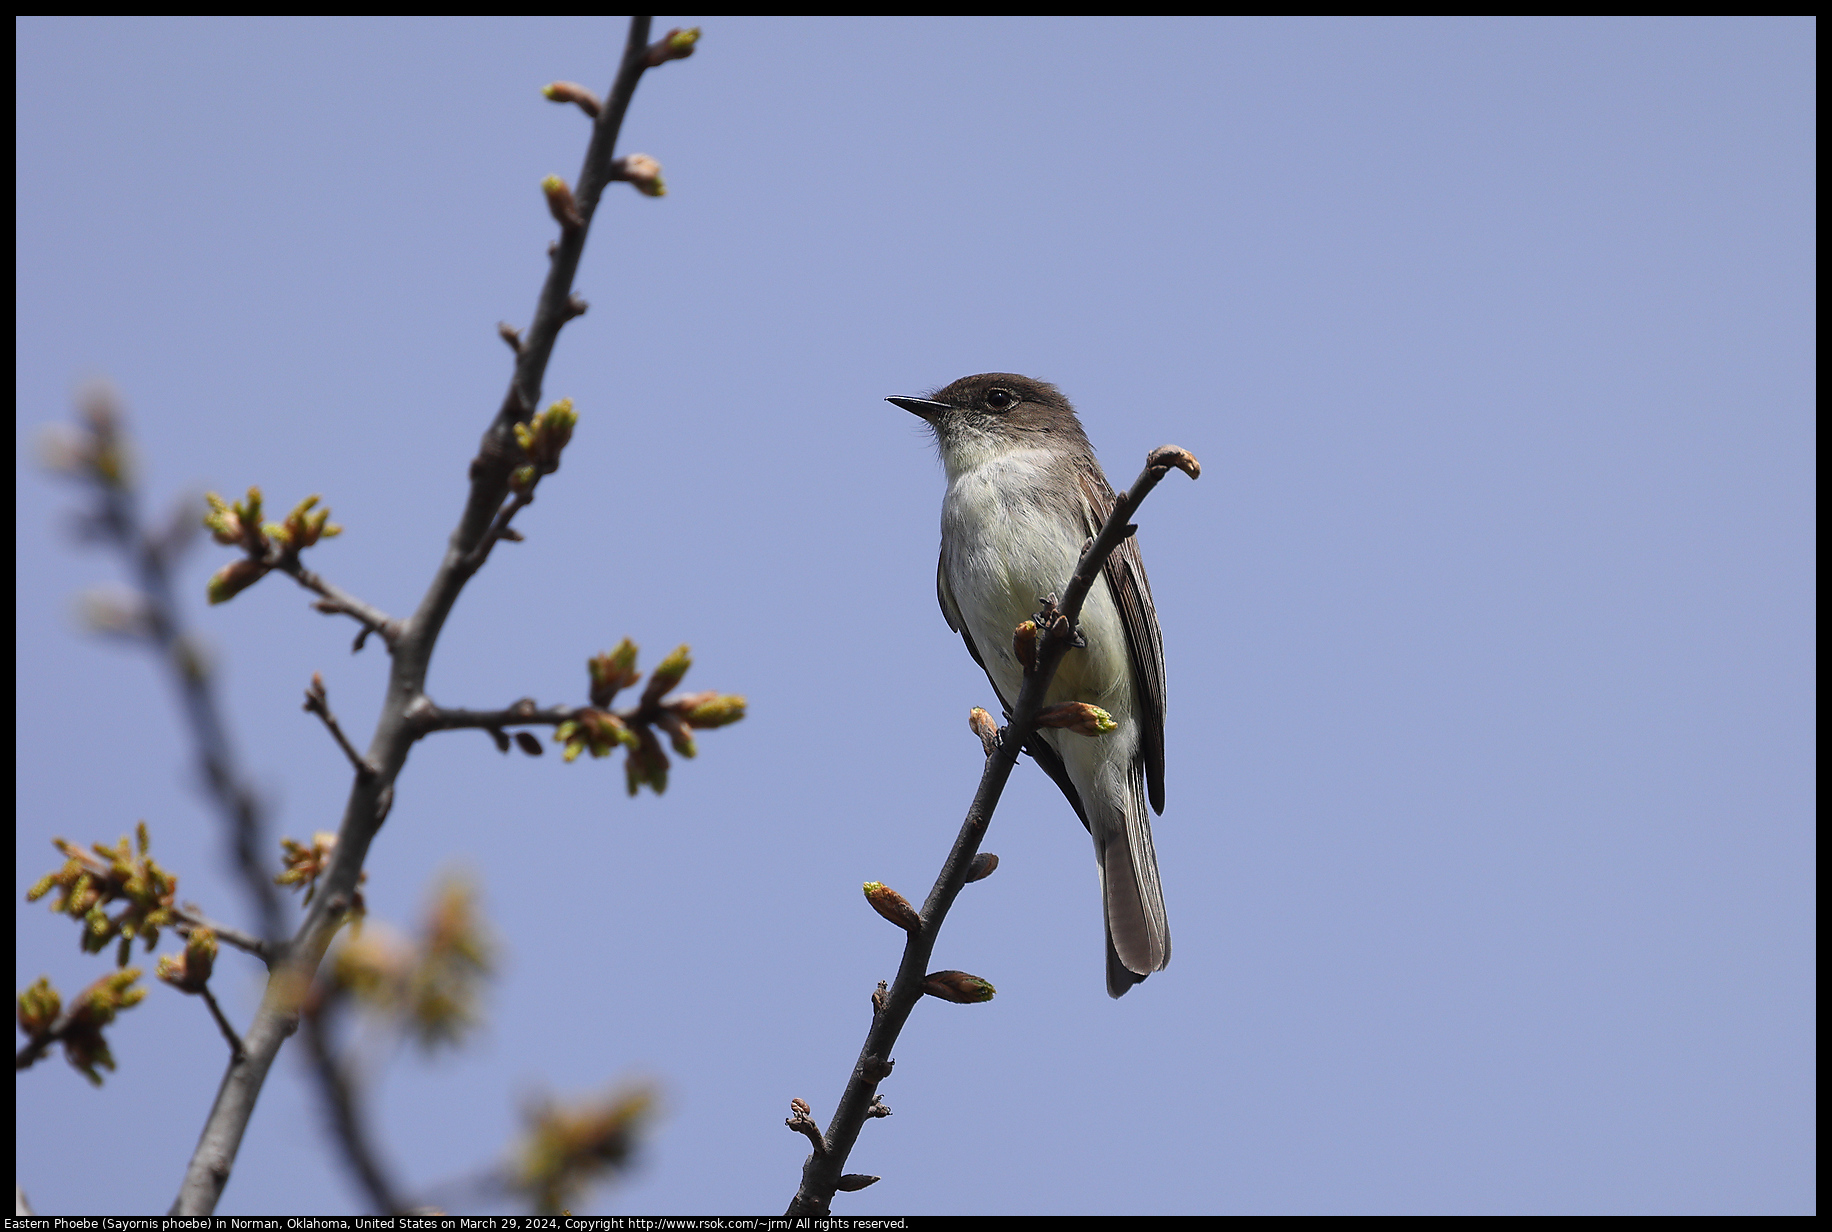 Eastern Phoebe (Sayornis phoebe) in Norman, Oklahoma, United States on March 29, 2024